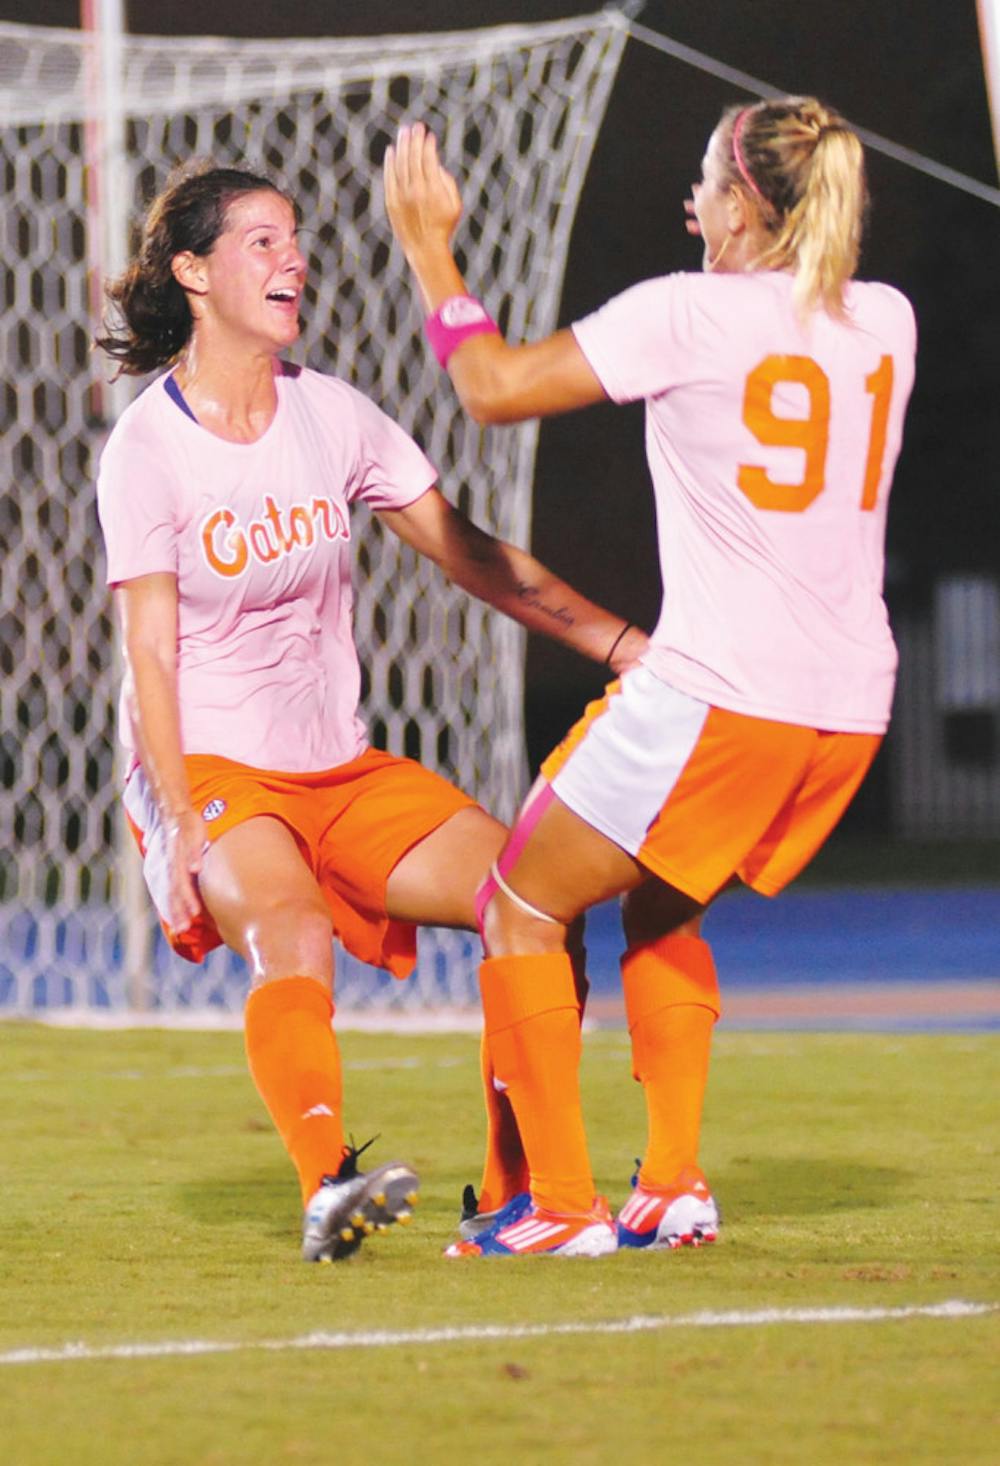 <p>Senior Jo Dragotta (left) celebrates with junior Adriana Leon (right) after scoring a goal in Florida's 2-1 win against Missouri on Friday at James G. Pressly Stadium. Dragotta is tied for the team lead in goals with five.</p>